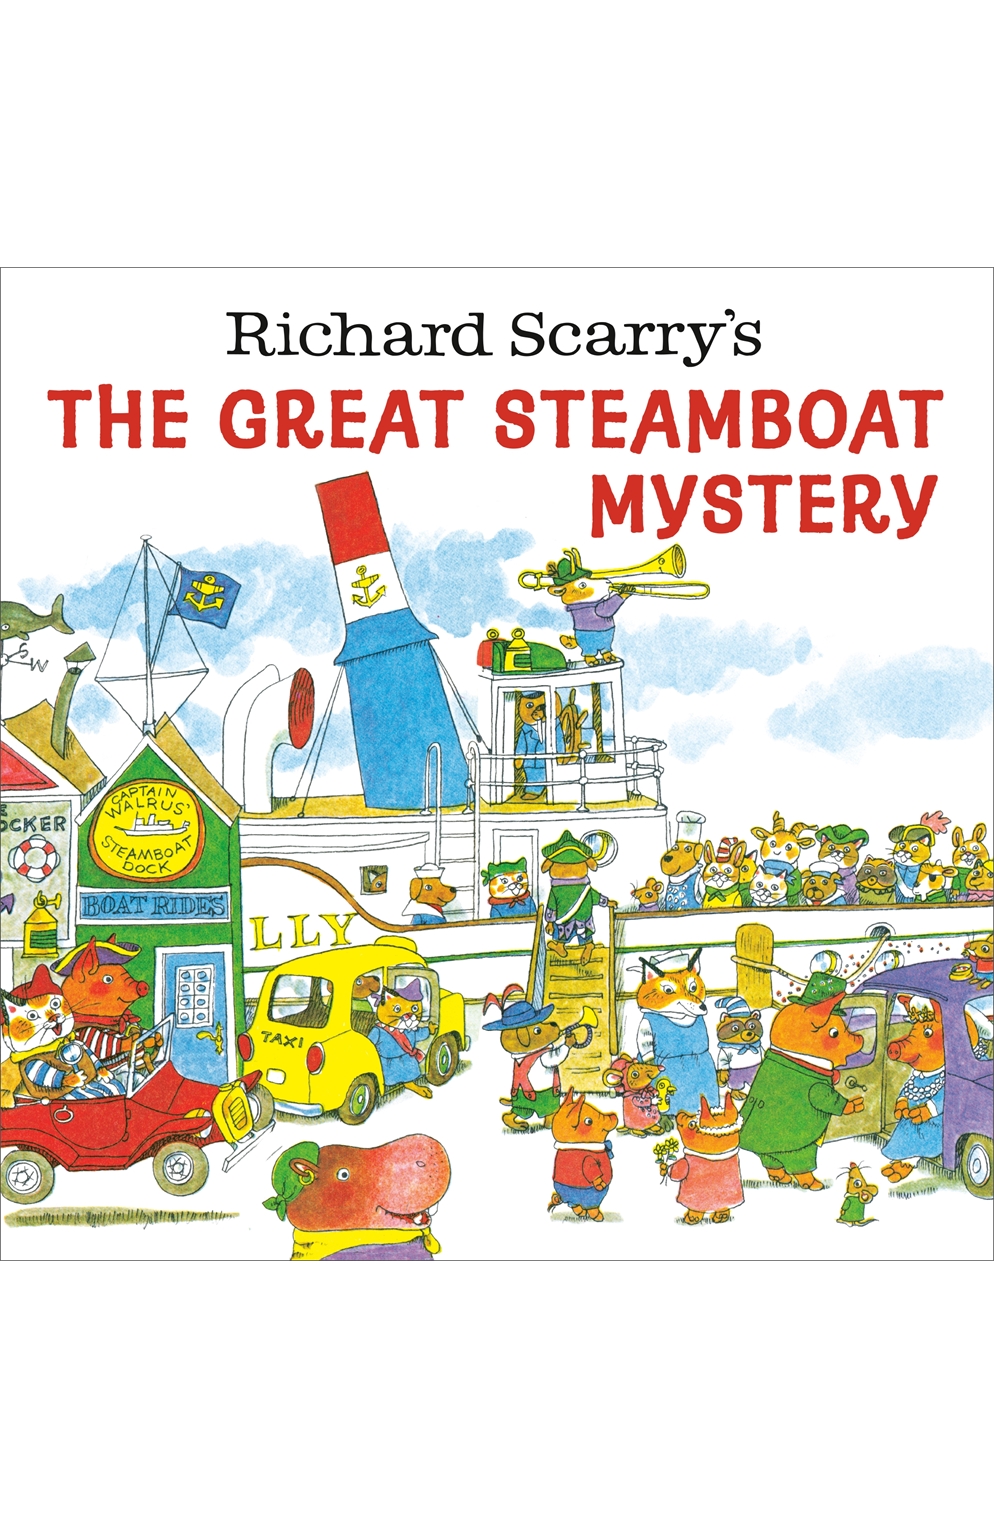 Richard Scarry's The Geat Steamboat Mystery